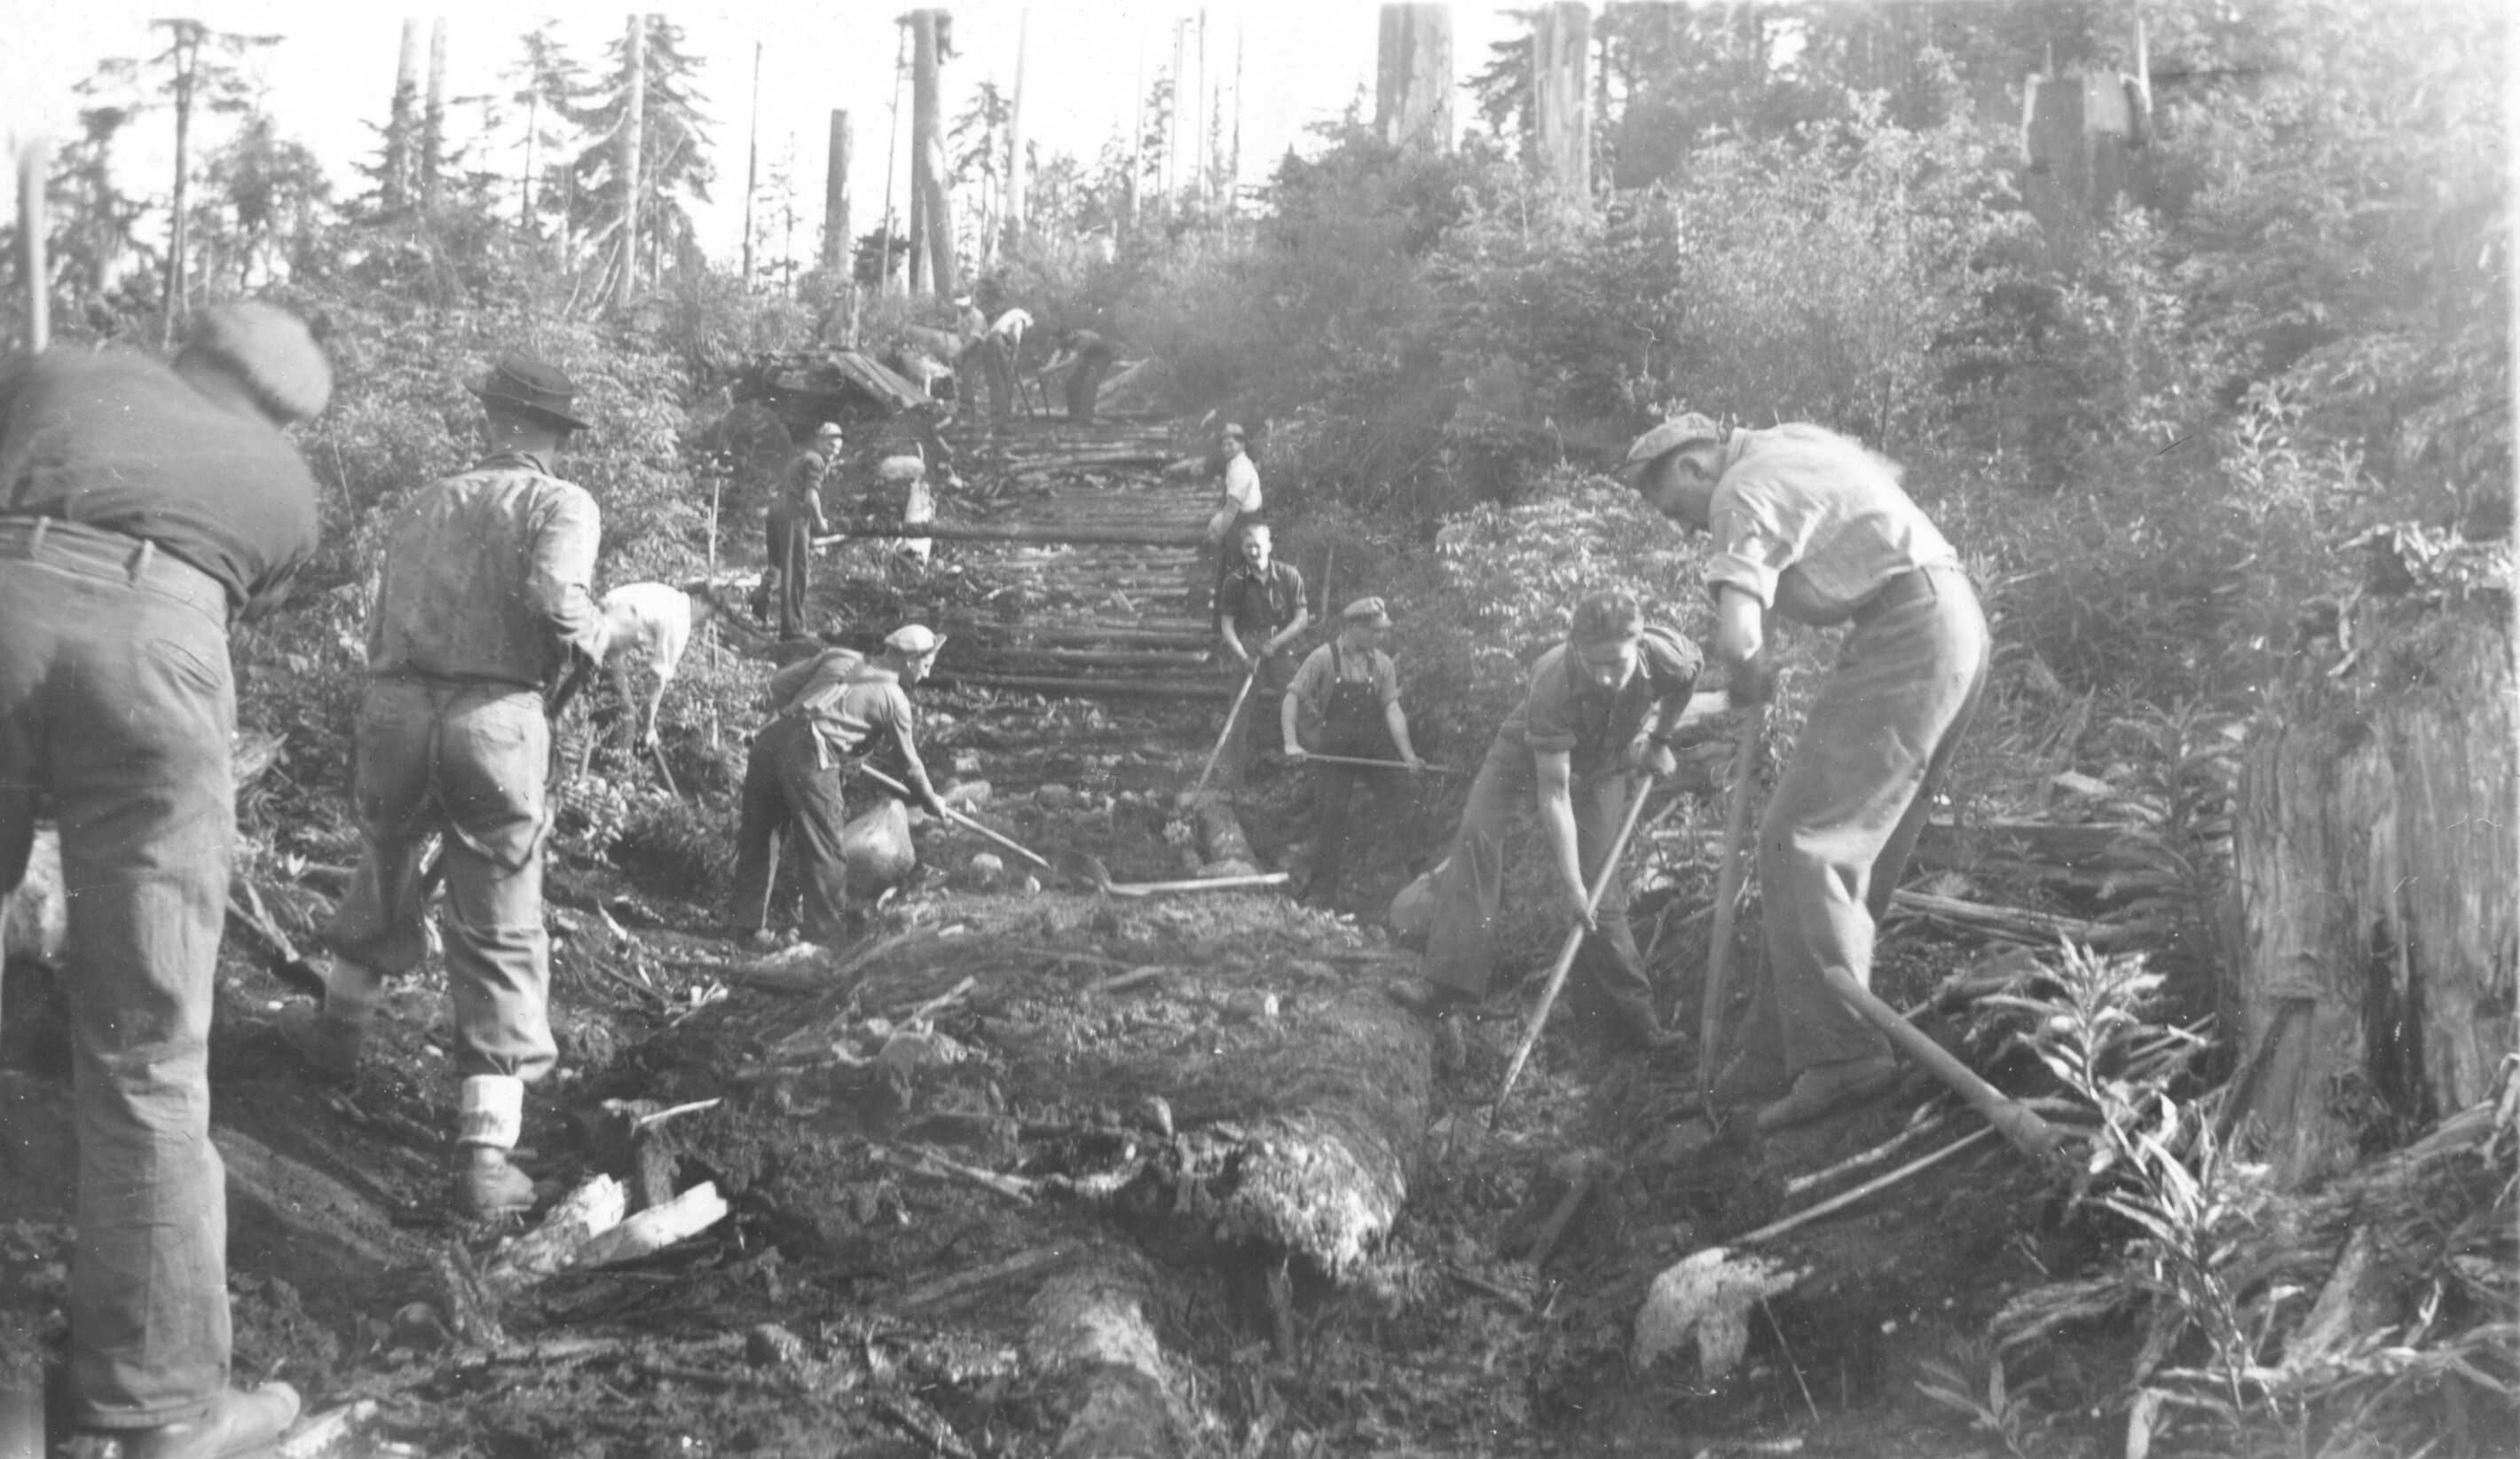 Black and white photograph. Men are clearing a path through a forest to build a road.